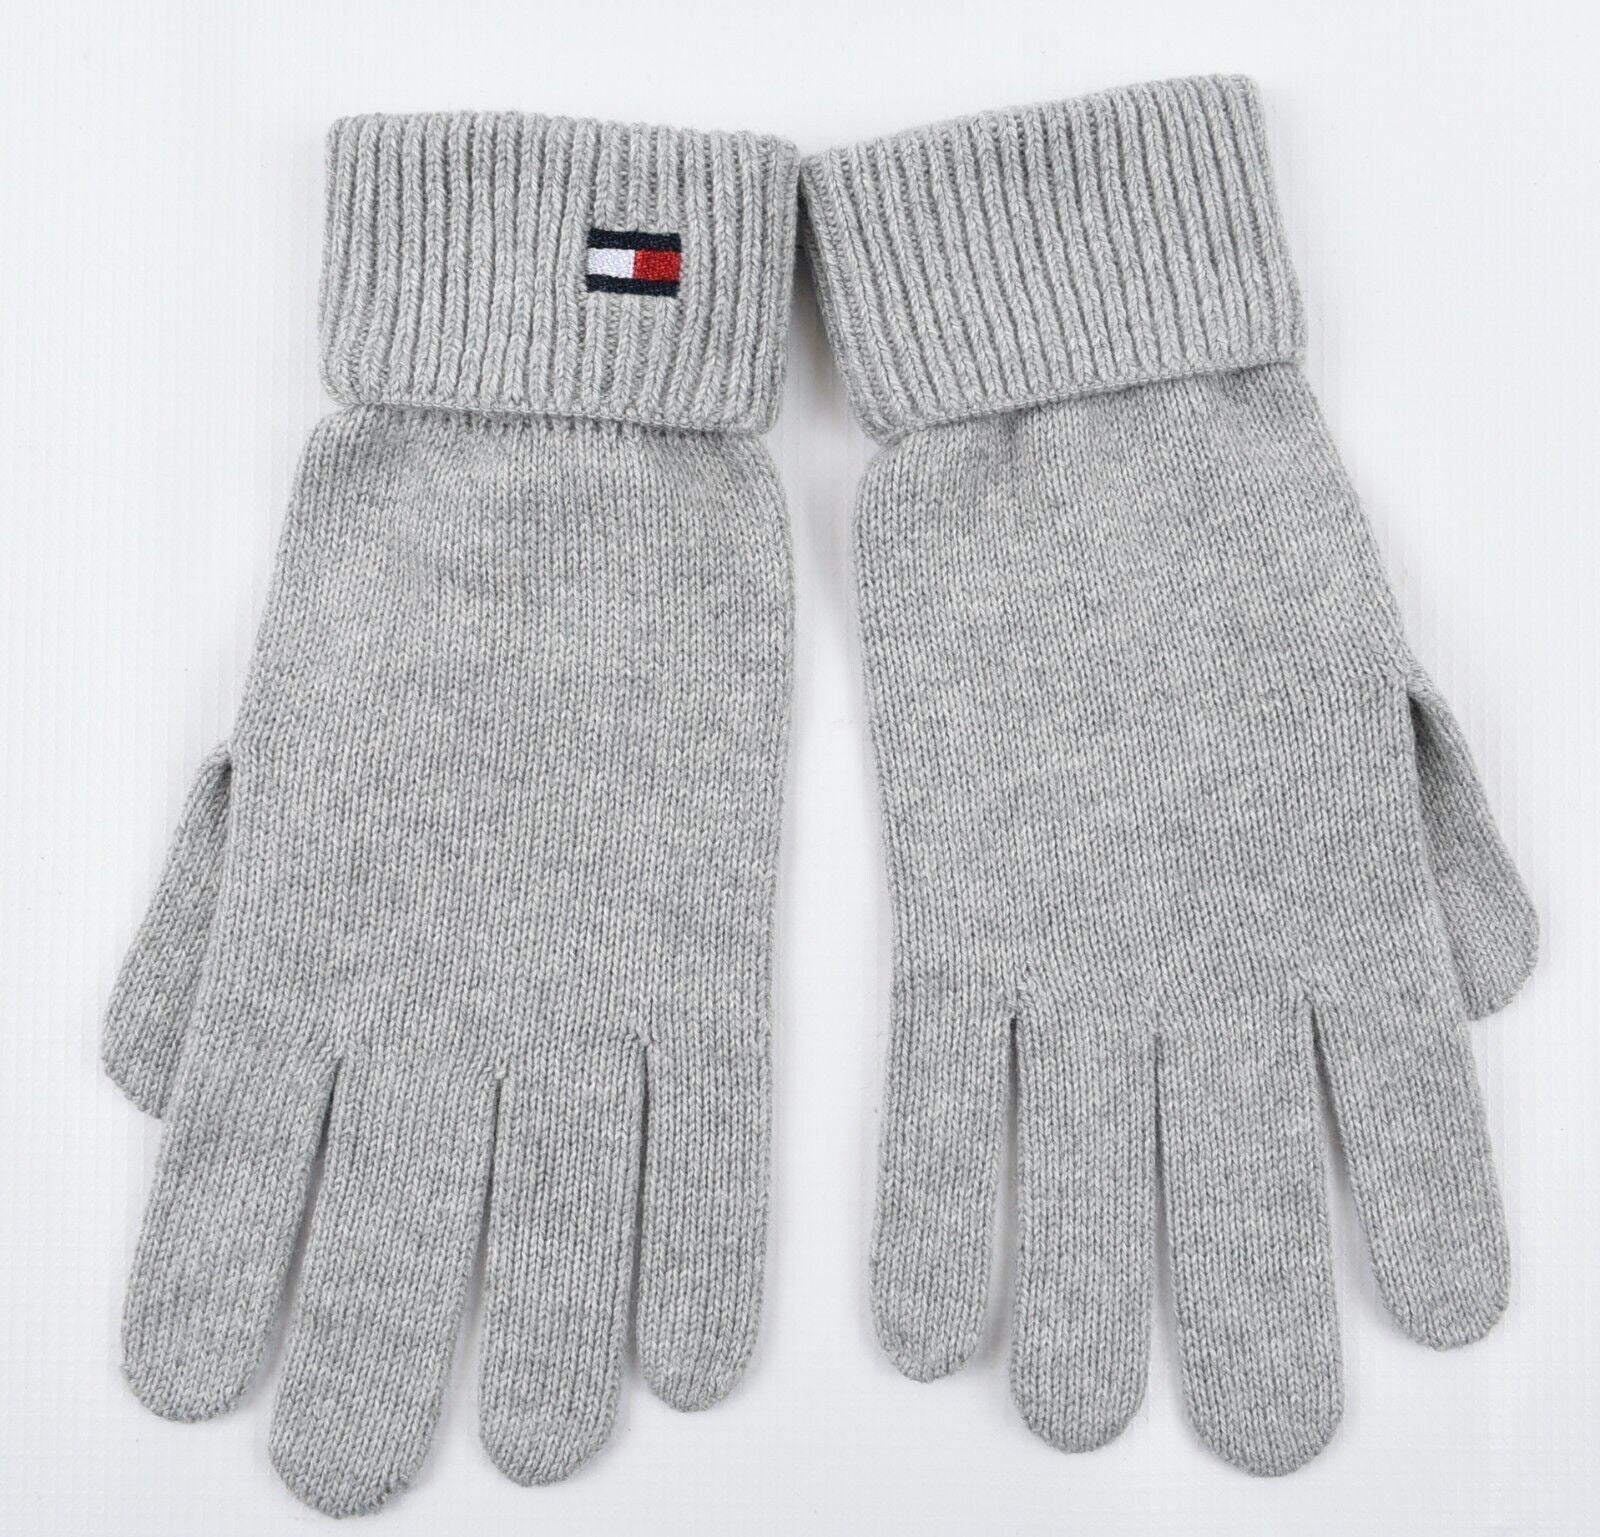 TOMMY HILFIGER Women's COTTON/CASHMERE Knitted Gloves, Grey Heather, One Size